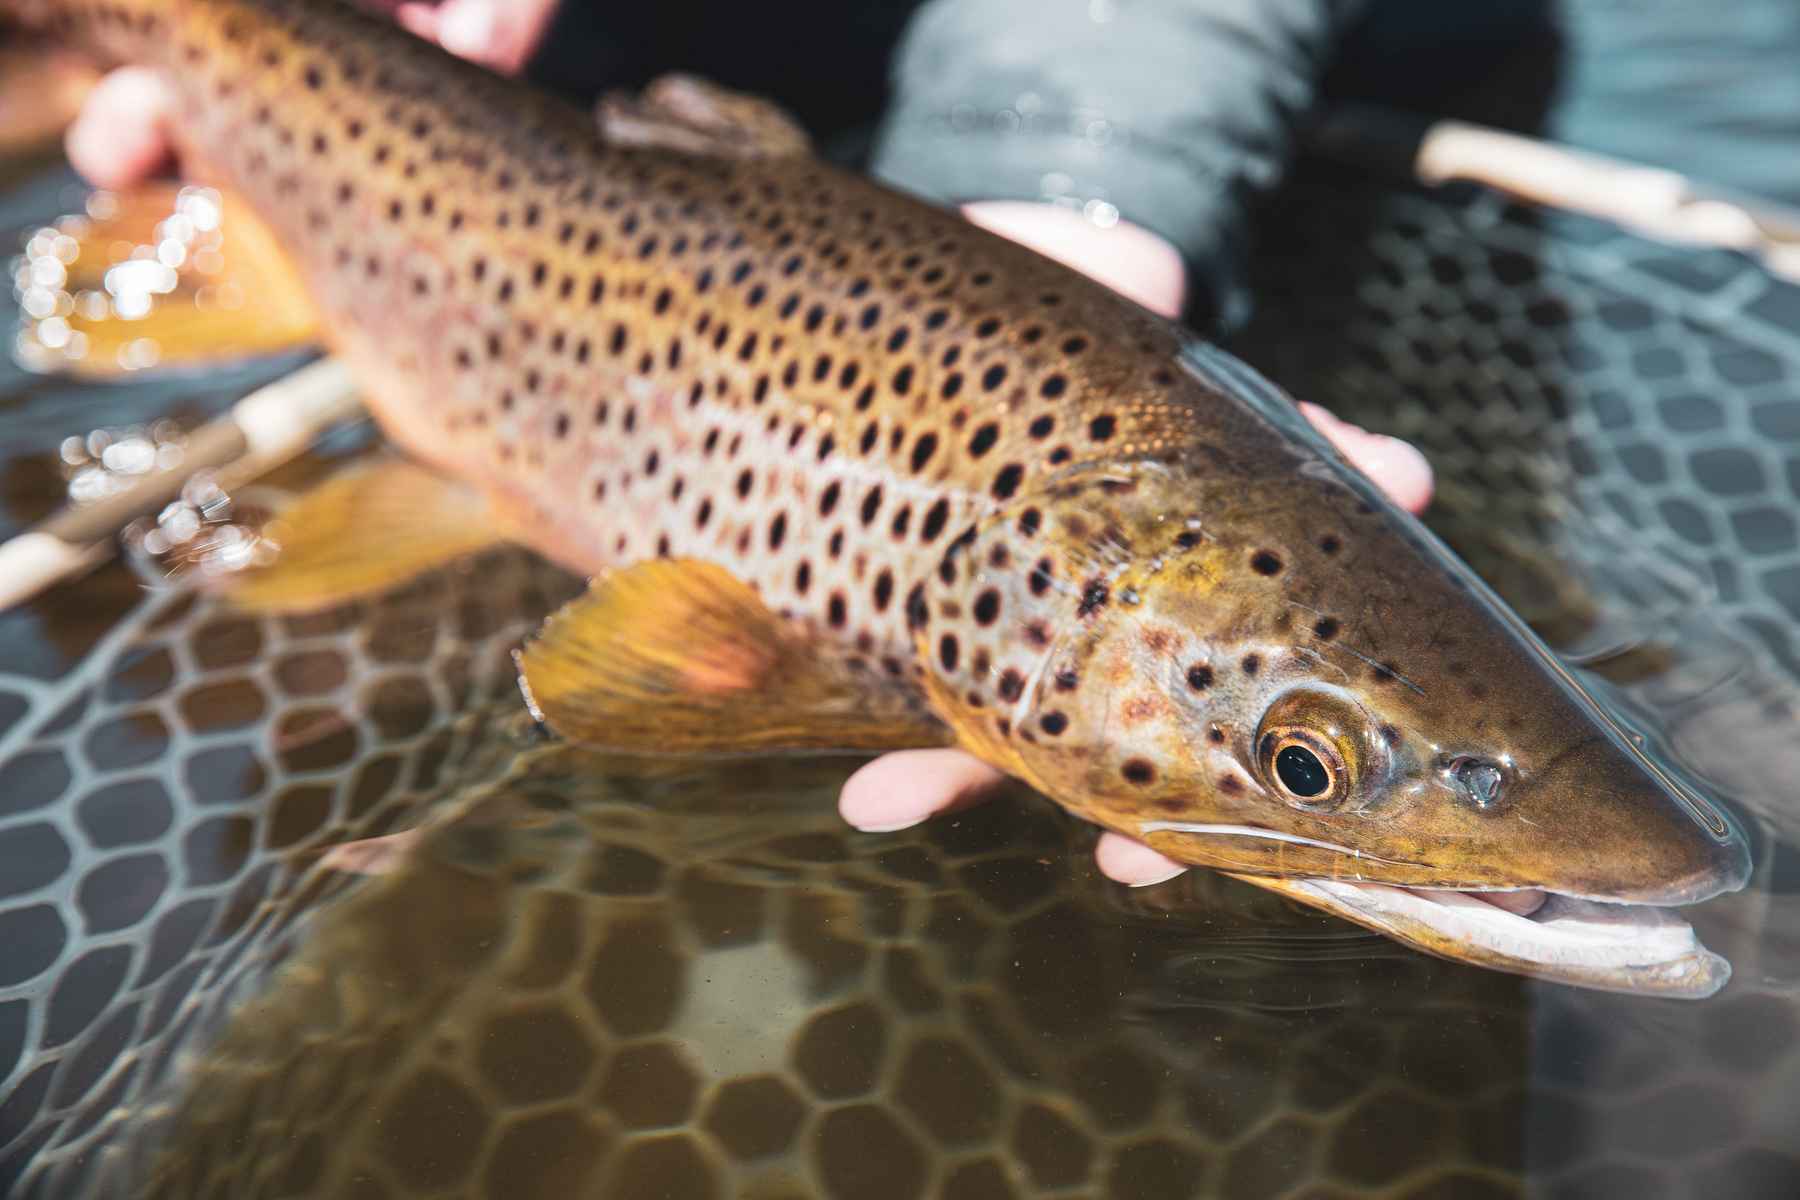 http://www.hatchmag.com/sites/default/files/styles/extra-large/public/field/image/553A8384.jpg